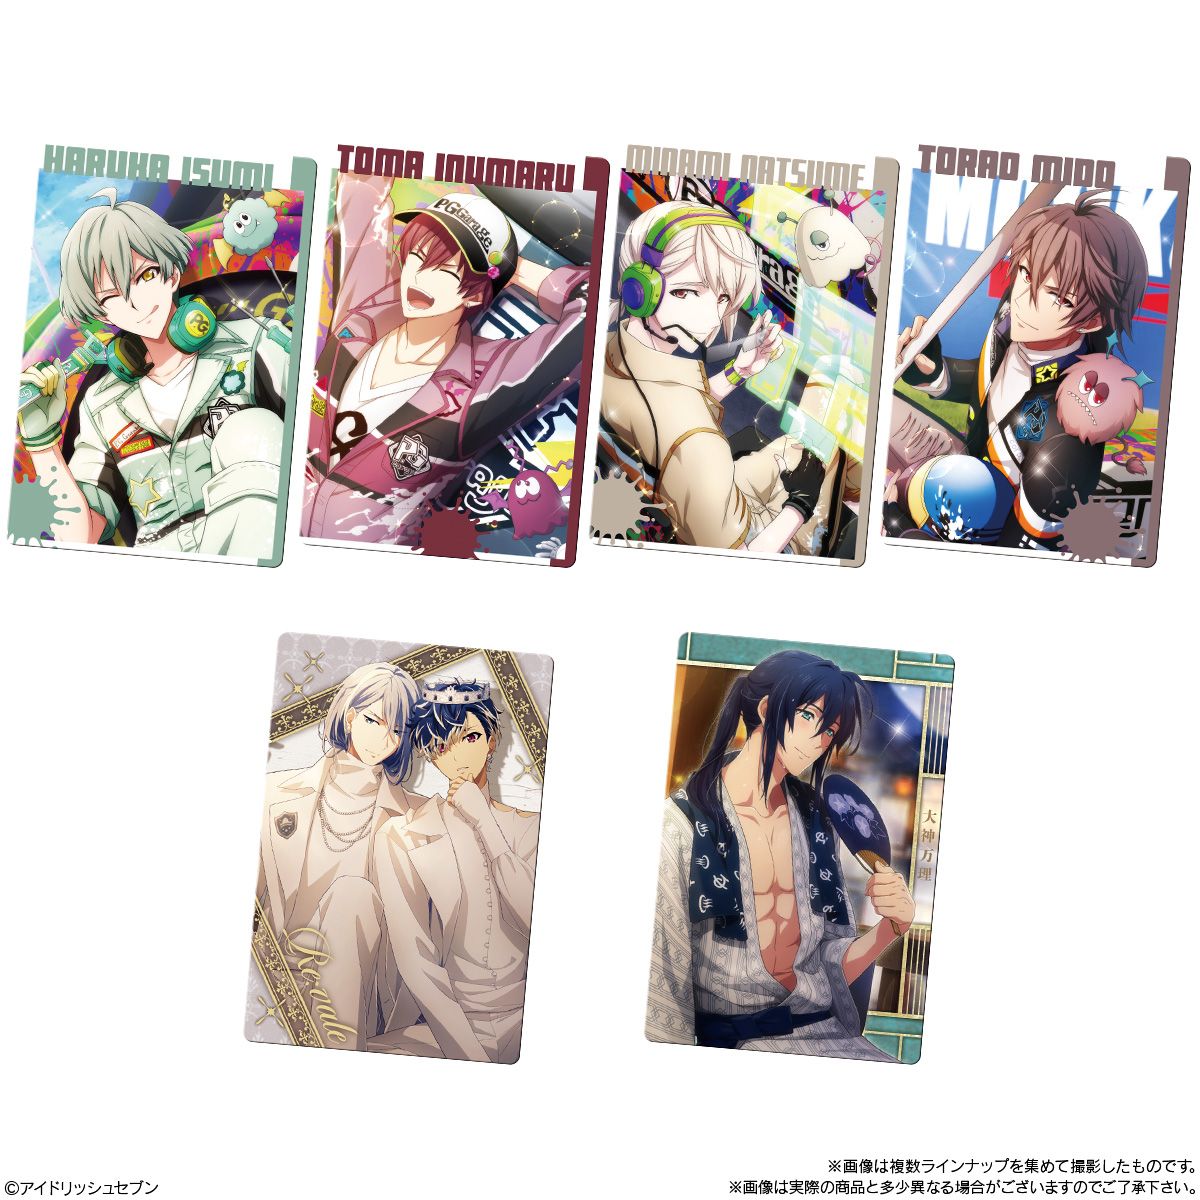 Idolish7 Metallic Card Collection Wafers 21-Single Pack (Random)-Bandai-Ace Cards &amp; Collectibles